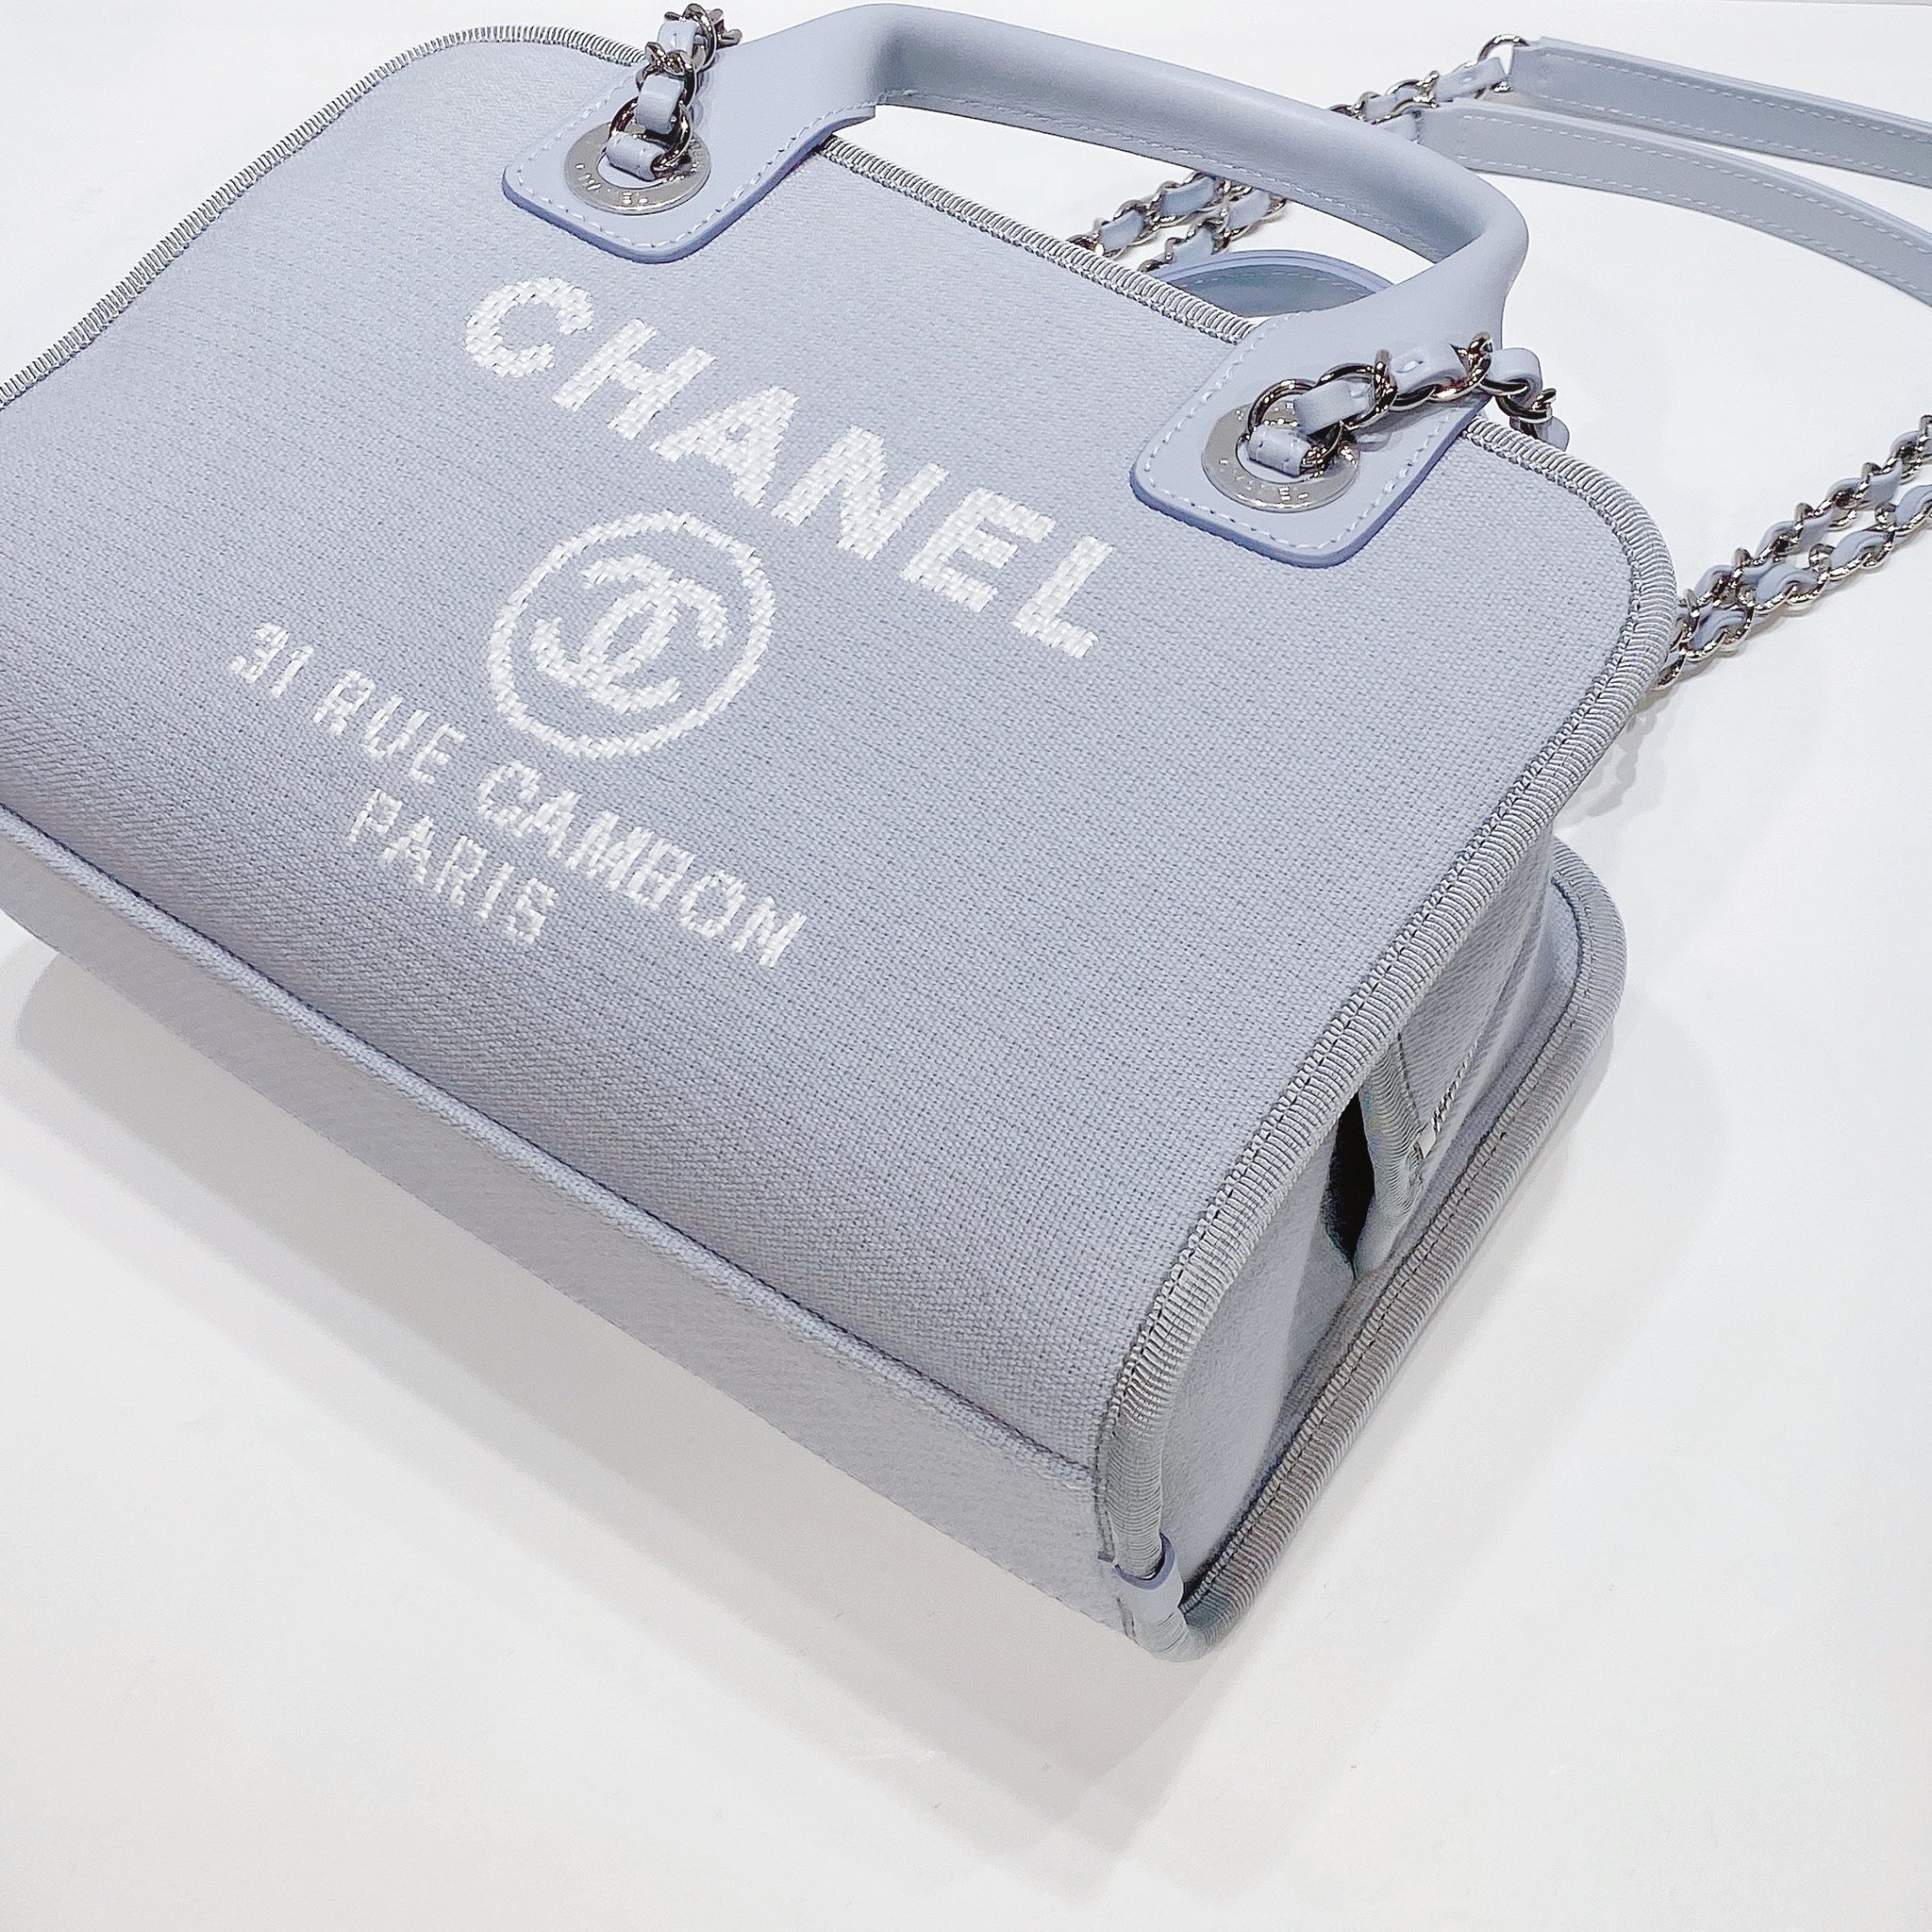 CHANEL DEAUVILLE 2021-22FW Bowling Bag